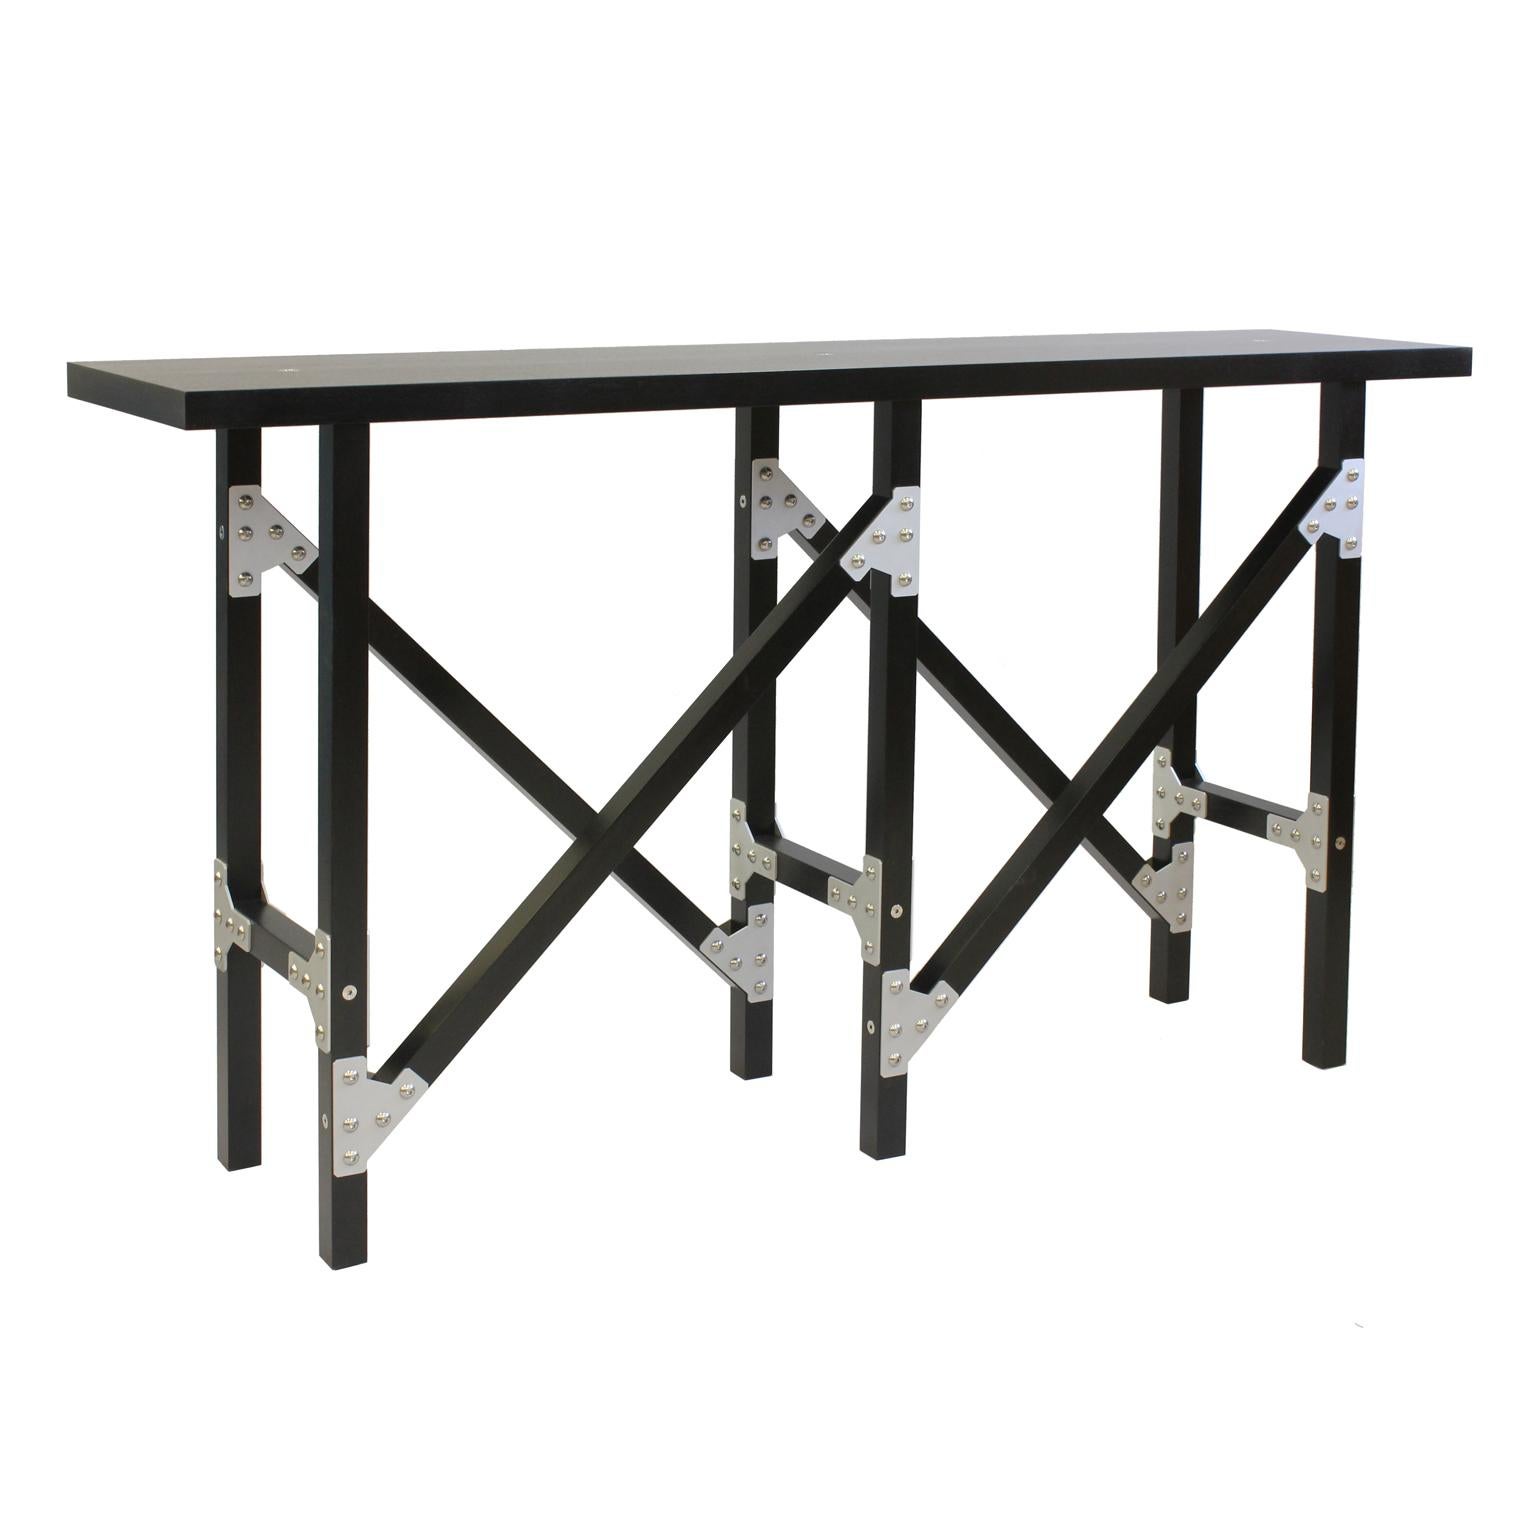 The Deviation table continues my exploration of the power of wooden line-like elements and industrial metal bracketry. It introduces the concept of a 45 degree line contrasting against its six vertical legs. The top is punctuated by three polished